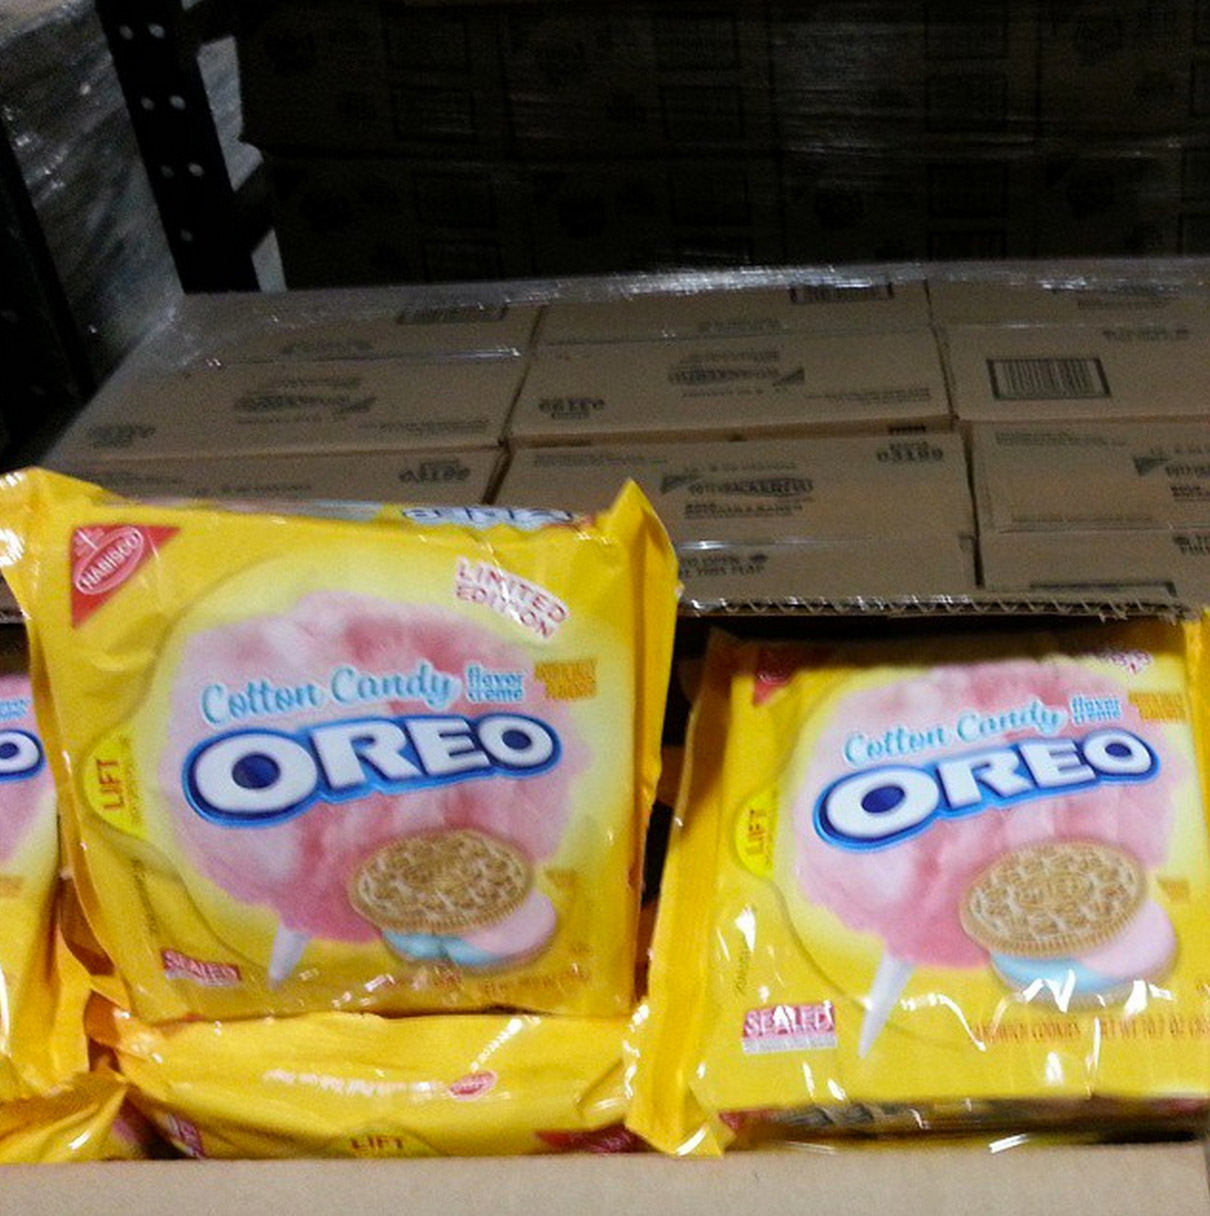 Next In The Exotic Oreo Flavor Pipeline: Cotton Candy